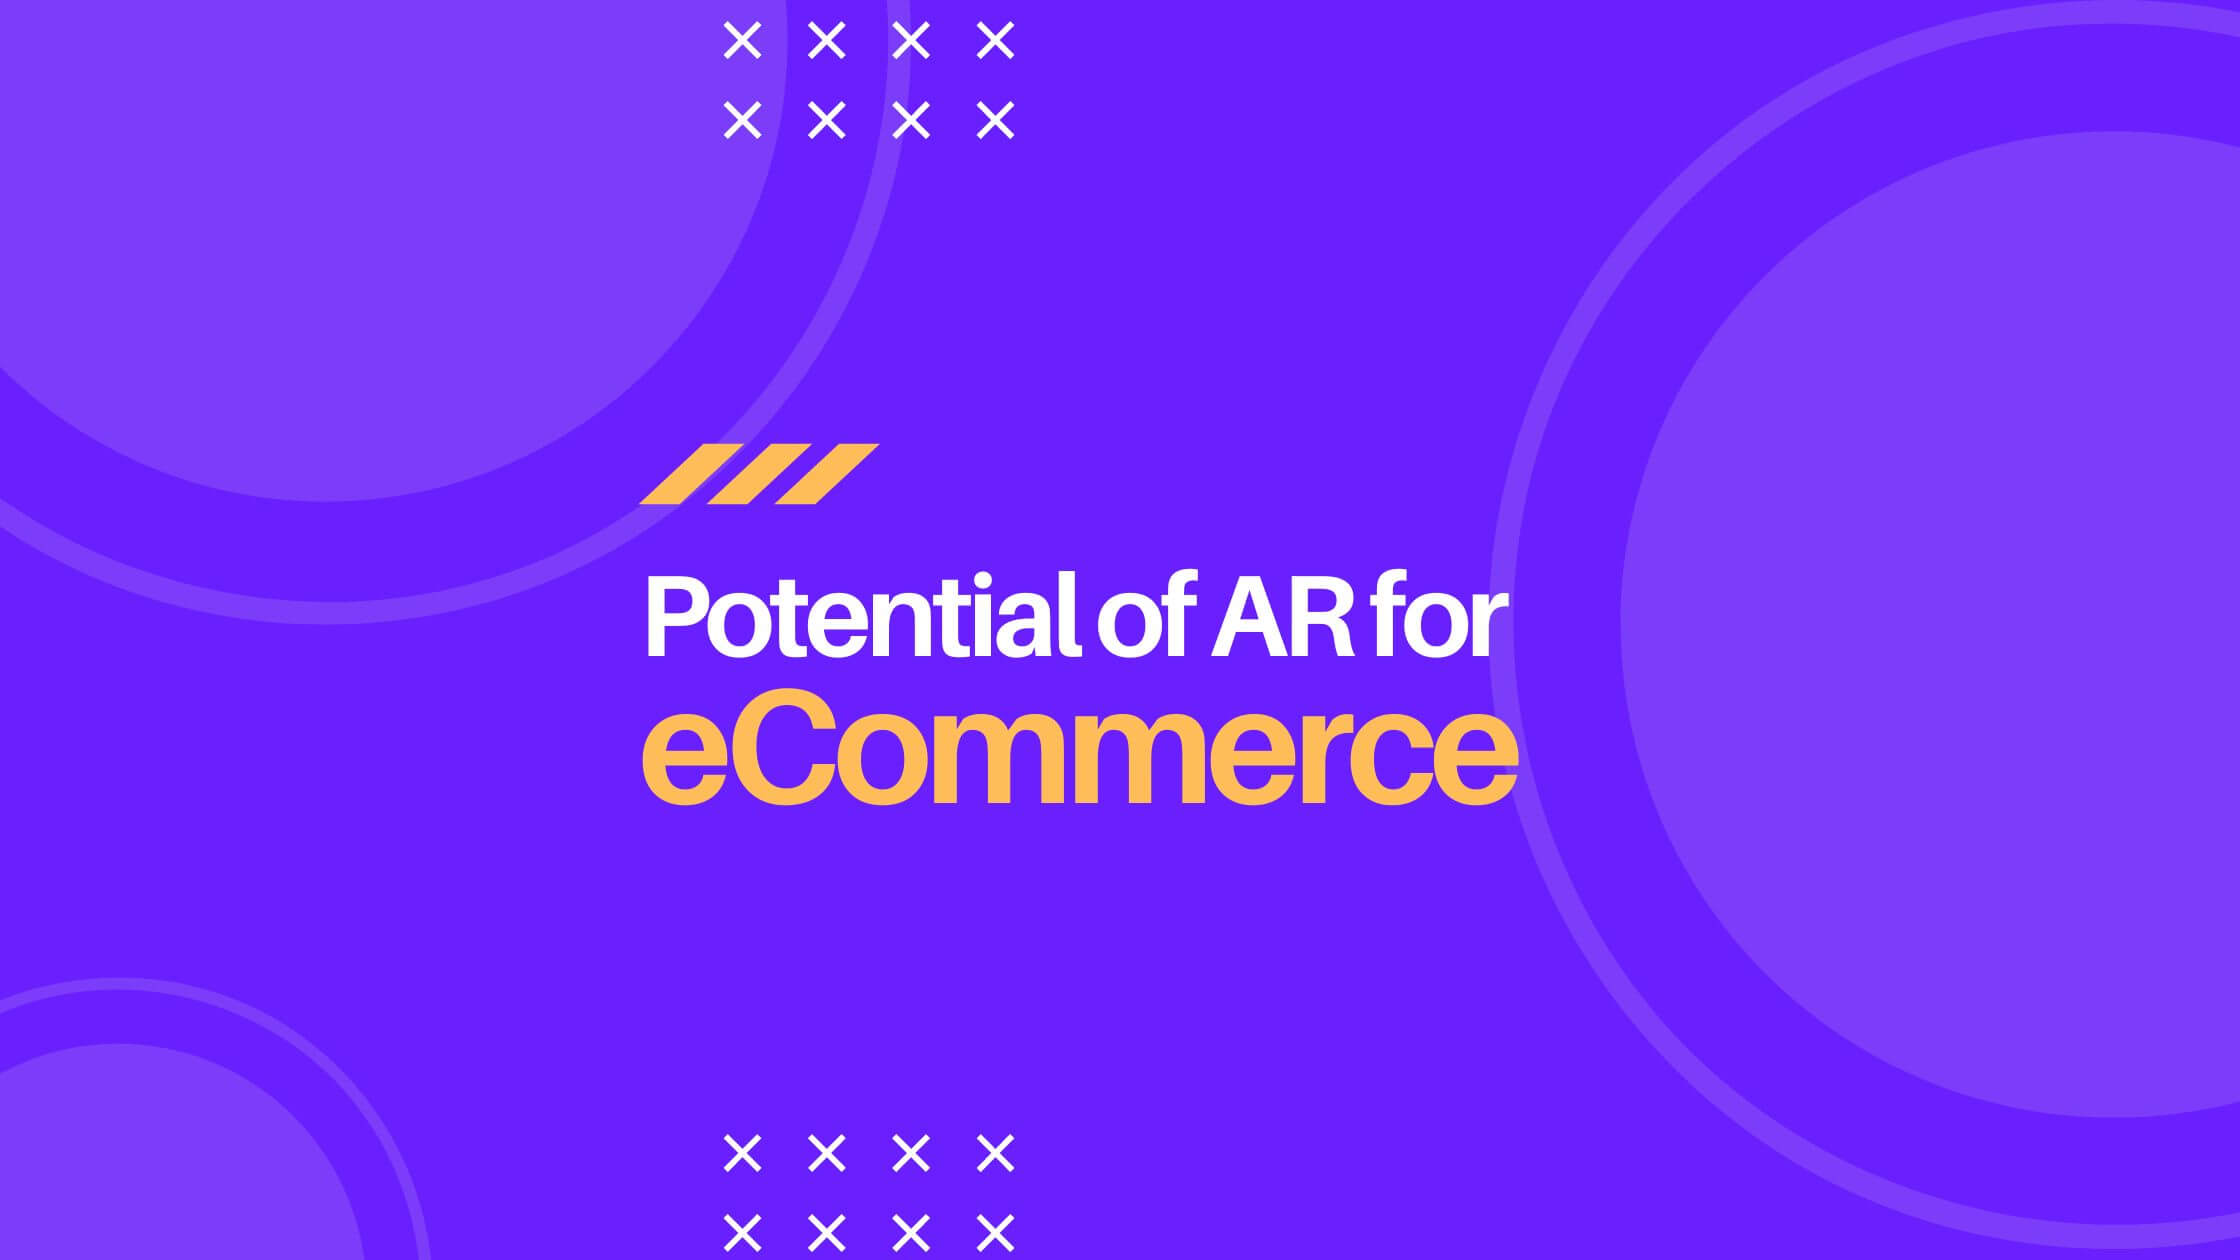 The potential of AR for eCommerce and how to create an AR shopping experience